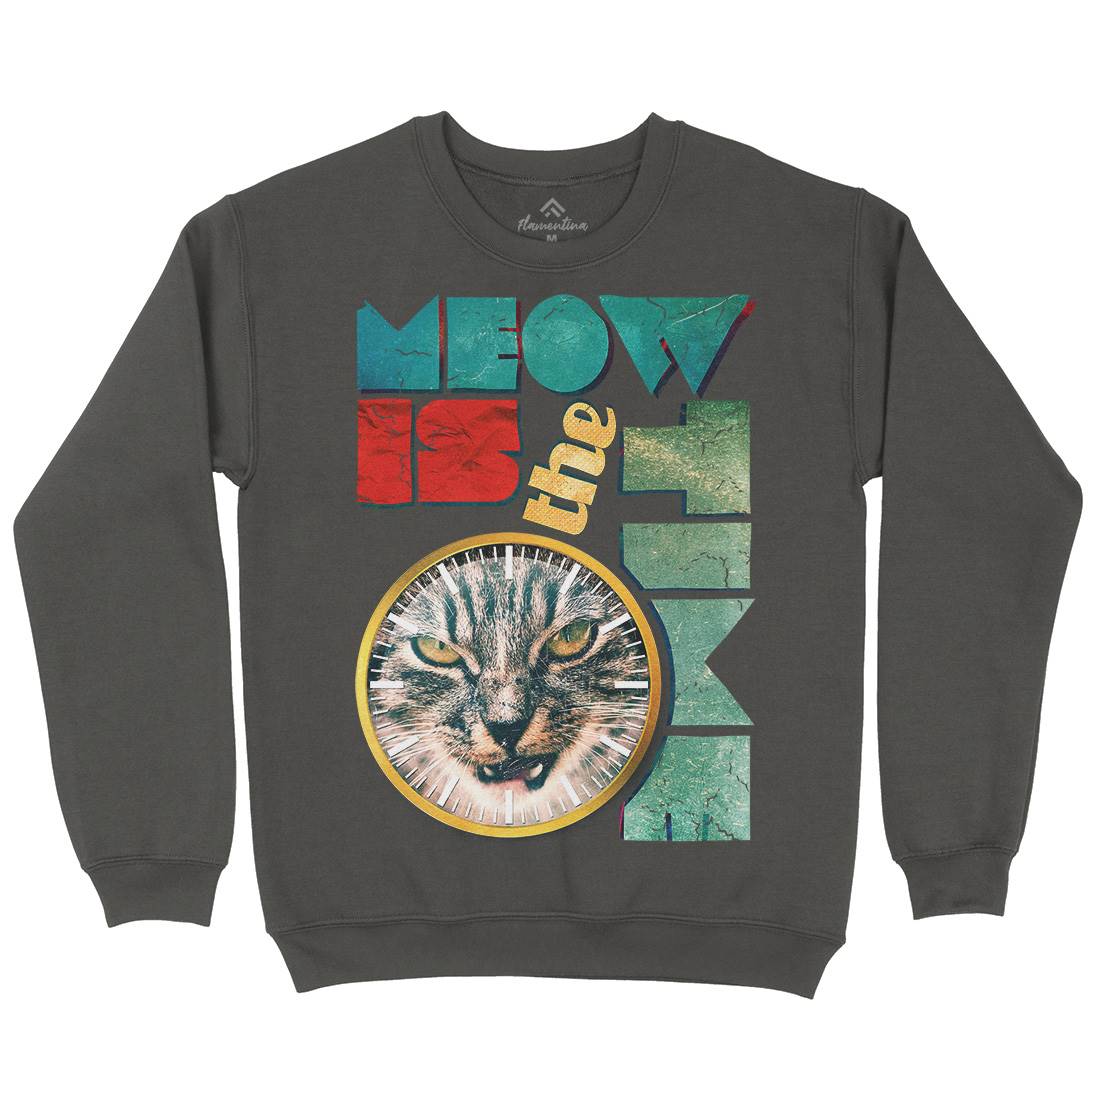 Meow Is The Time Kids Crew Neck Sweatshirt Animals A876